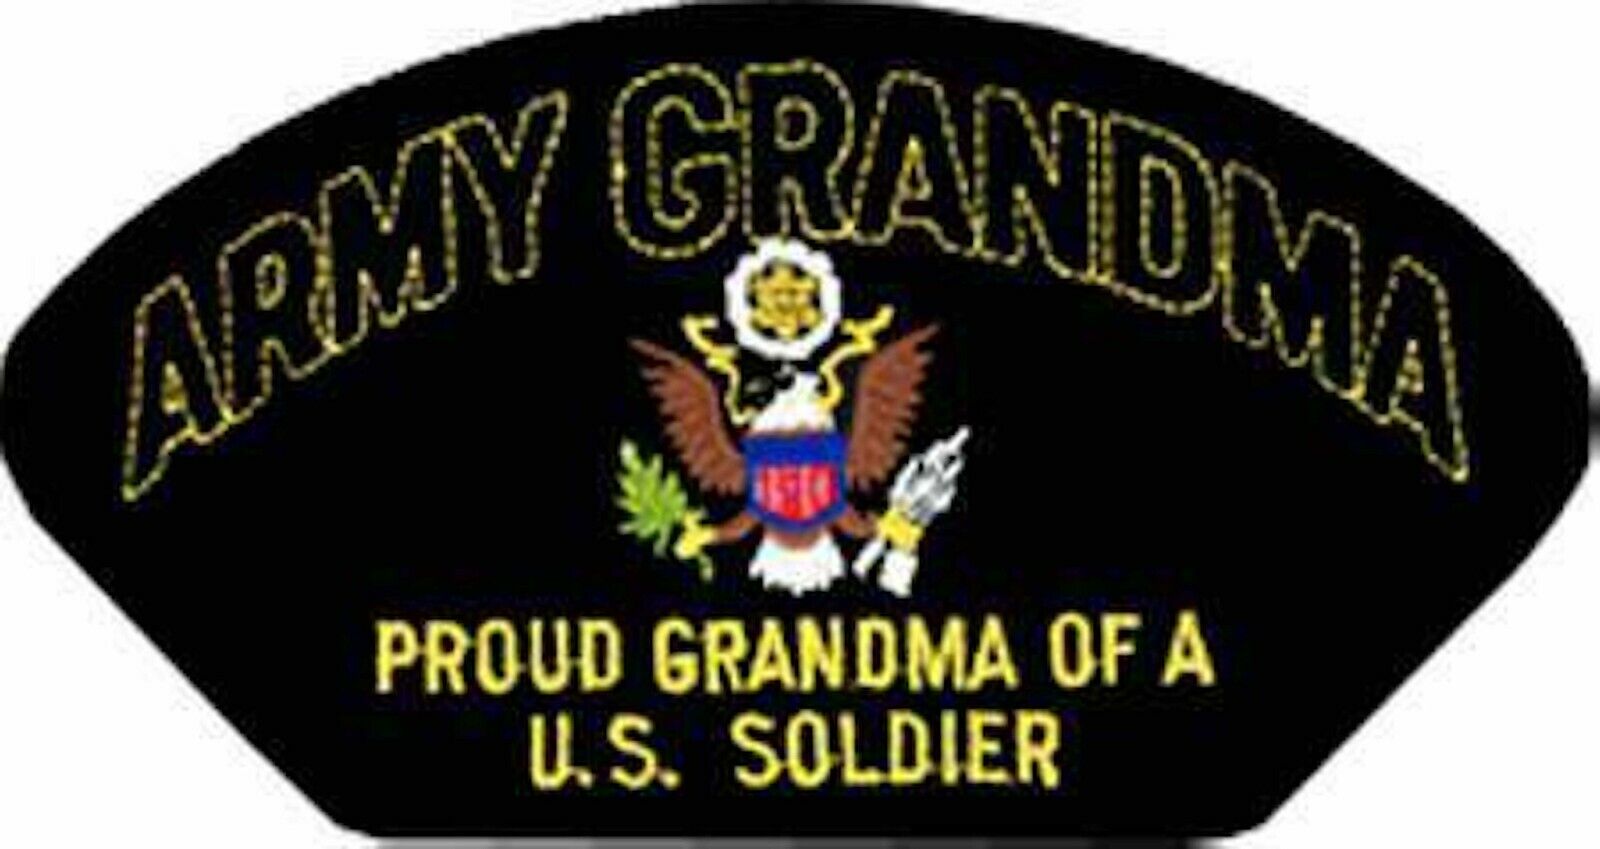 PROUD ARMY GRANDMA GRANDMOTHER  OF A U.S. SOLDIER EMBROIDERED MILITARY  PATCH